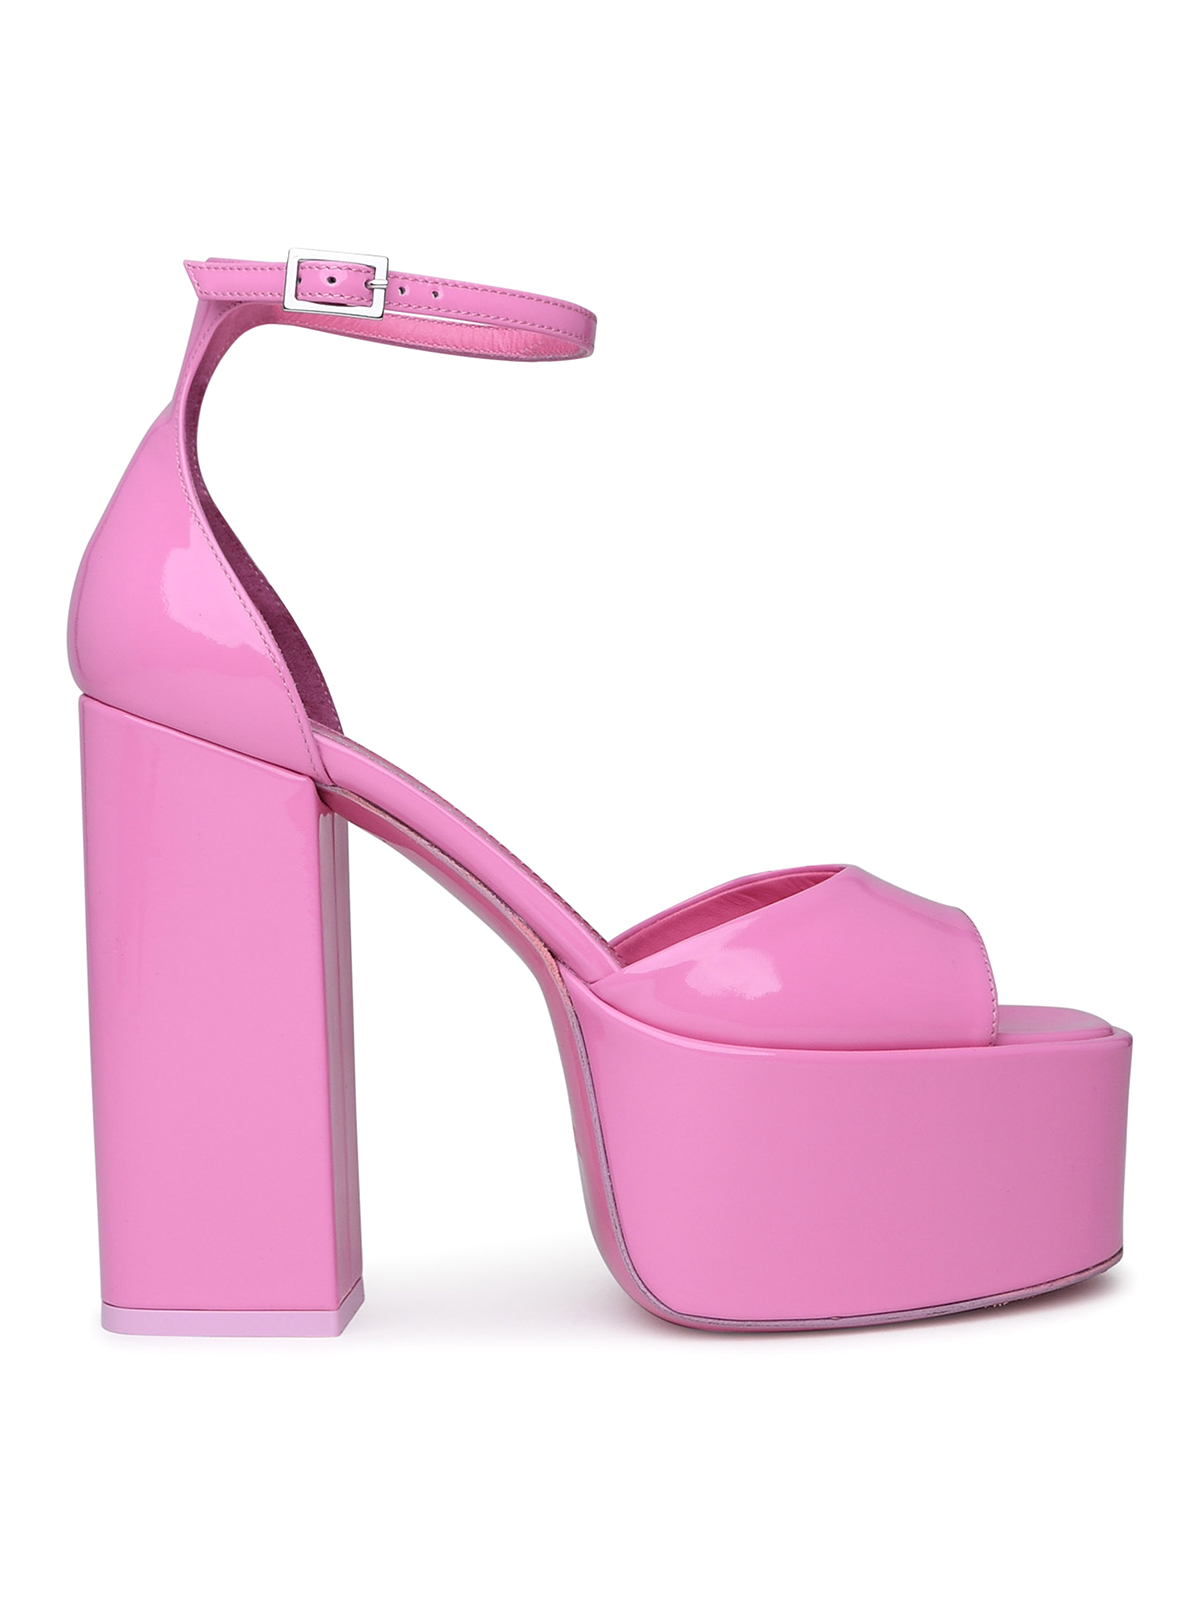 Paris Texas Tatiana Sandal In Pink Patent Leather In Nude & Neutrals